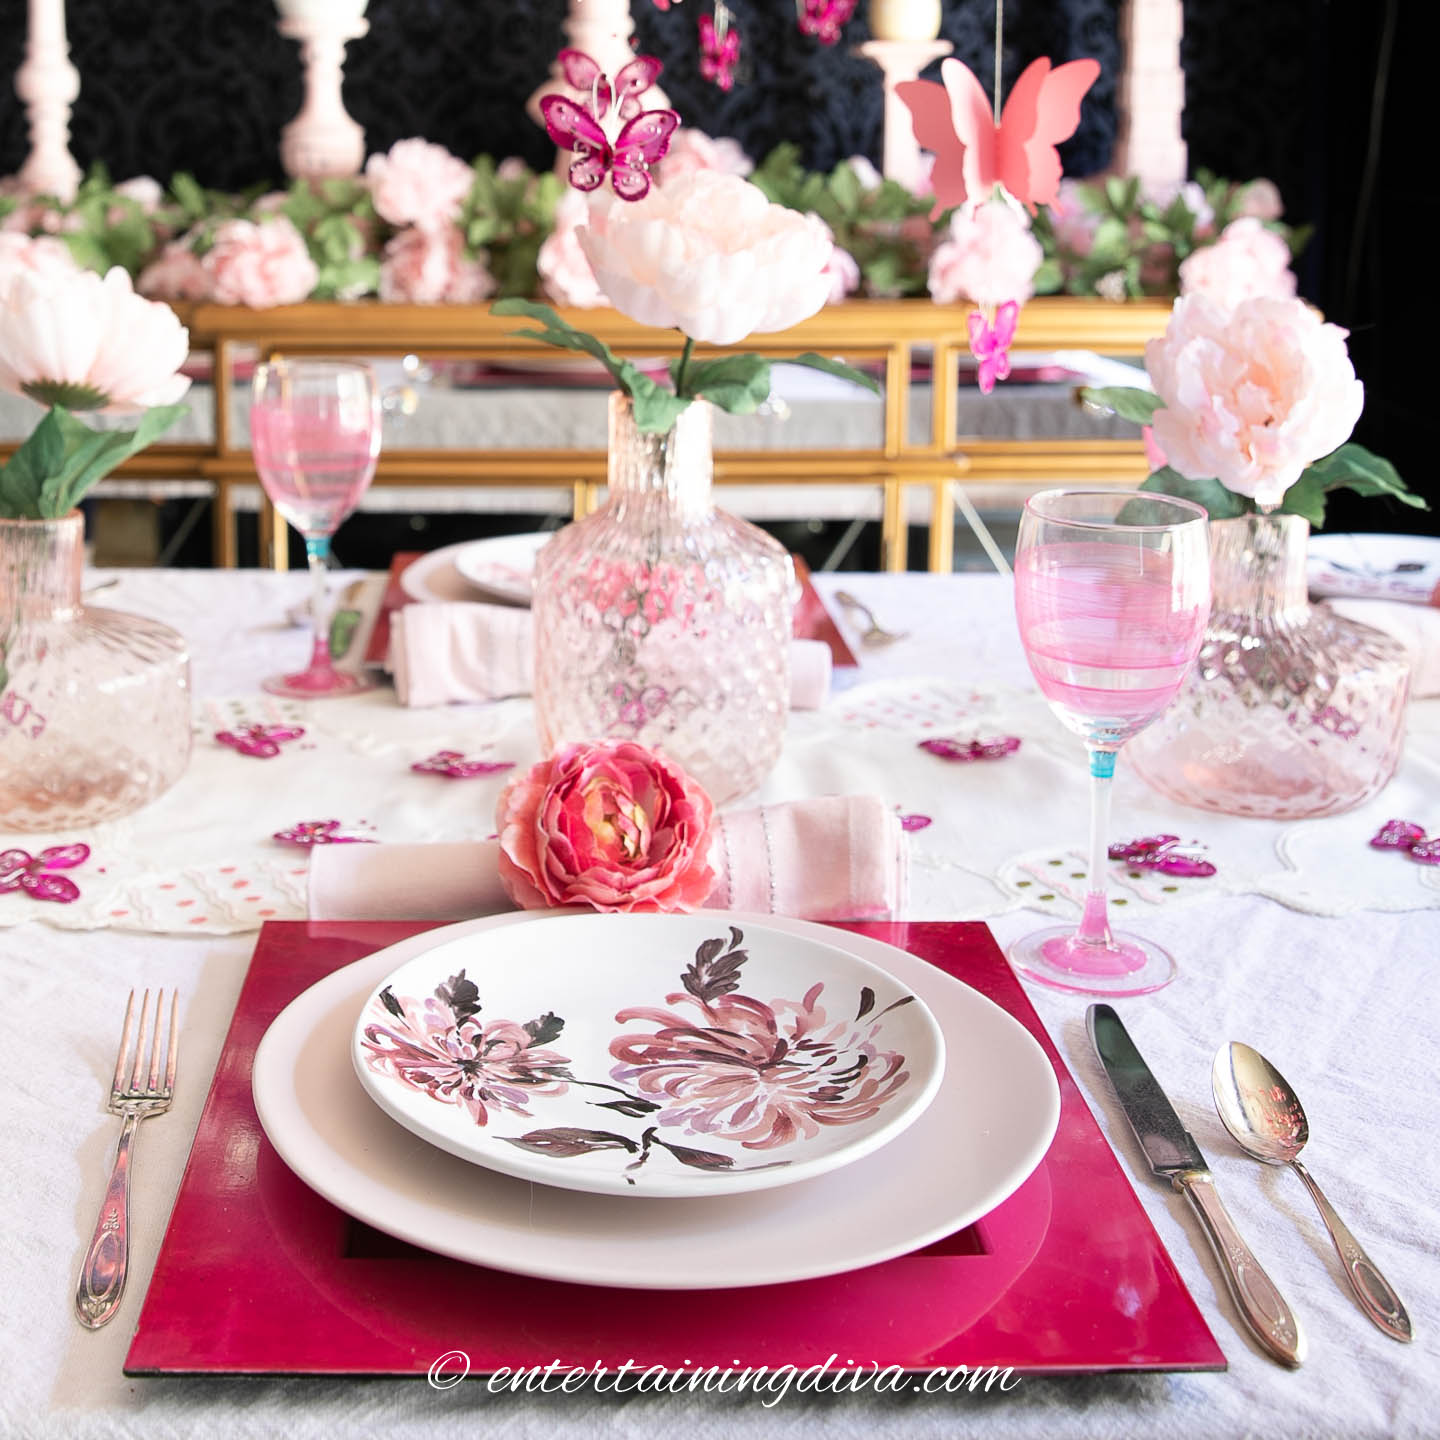 Pink flowers and butterflies place setting with pink striped wine glasses